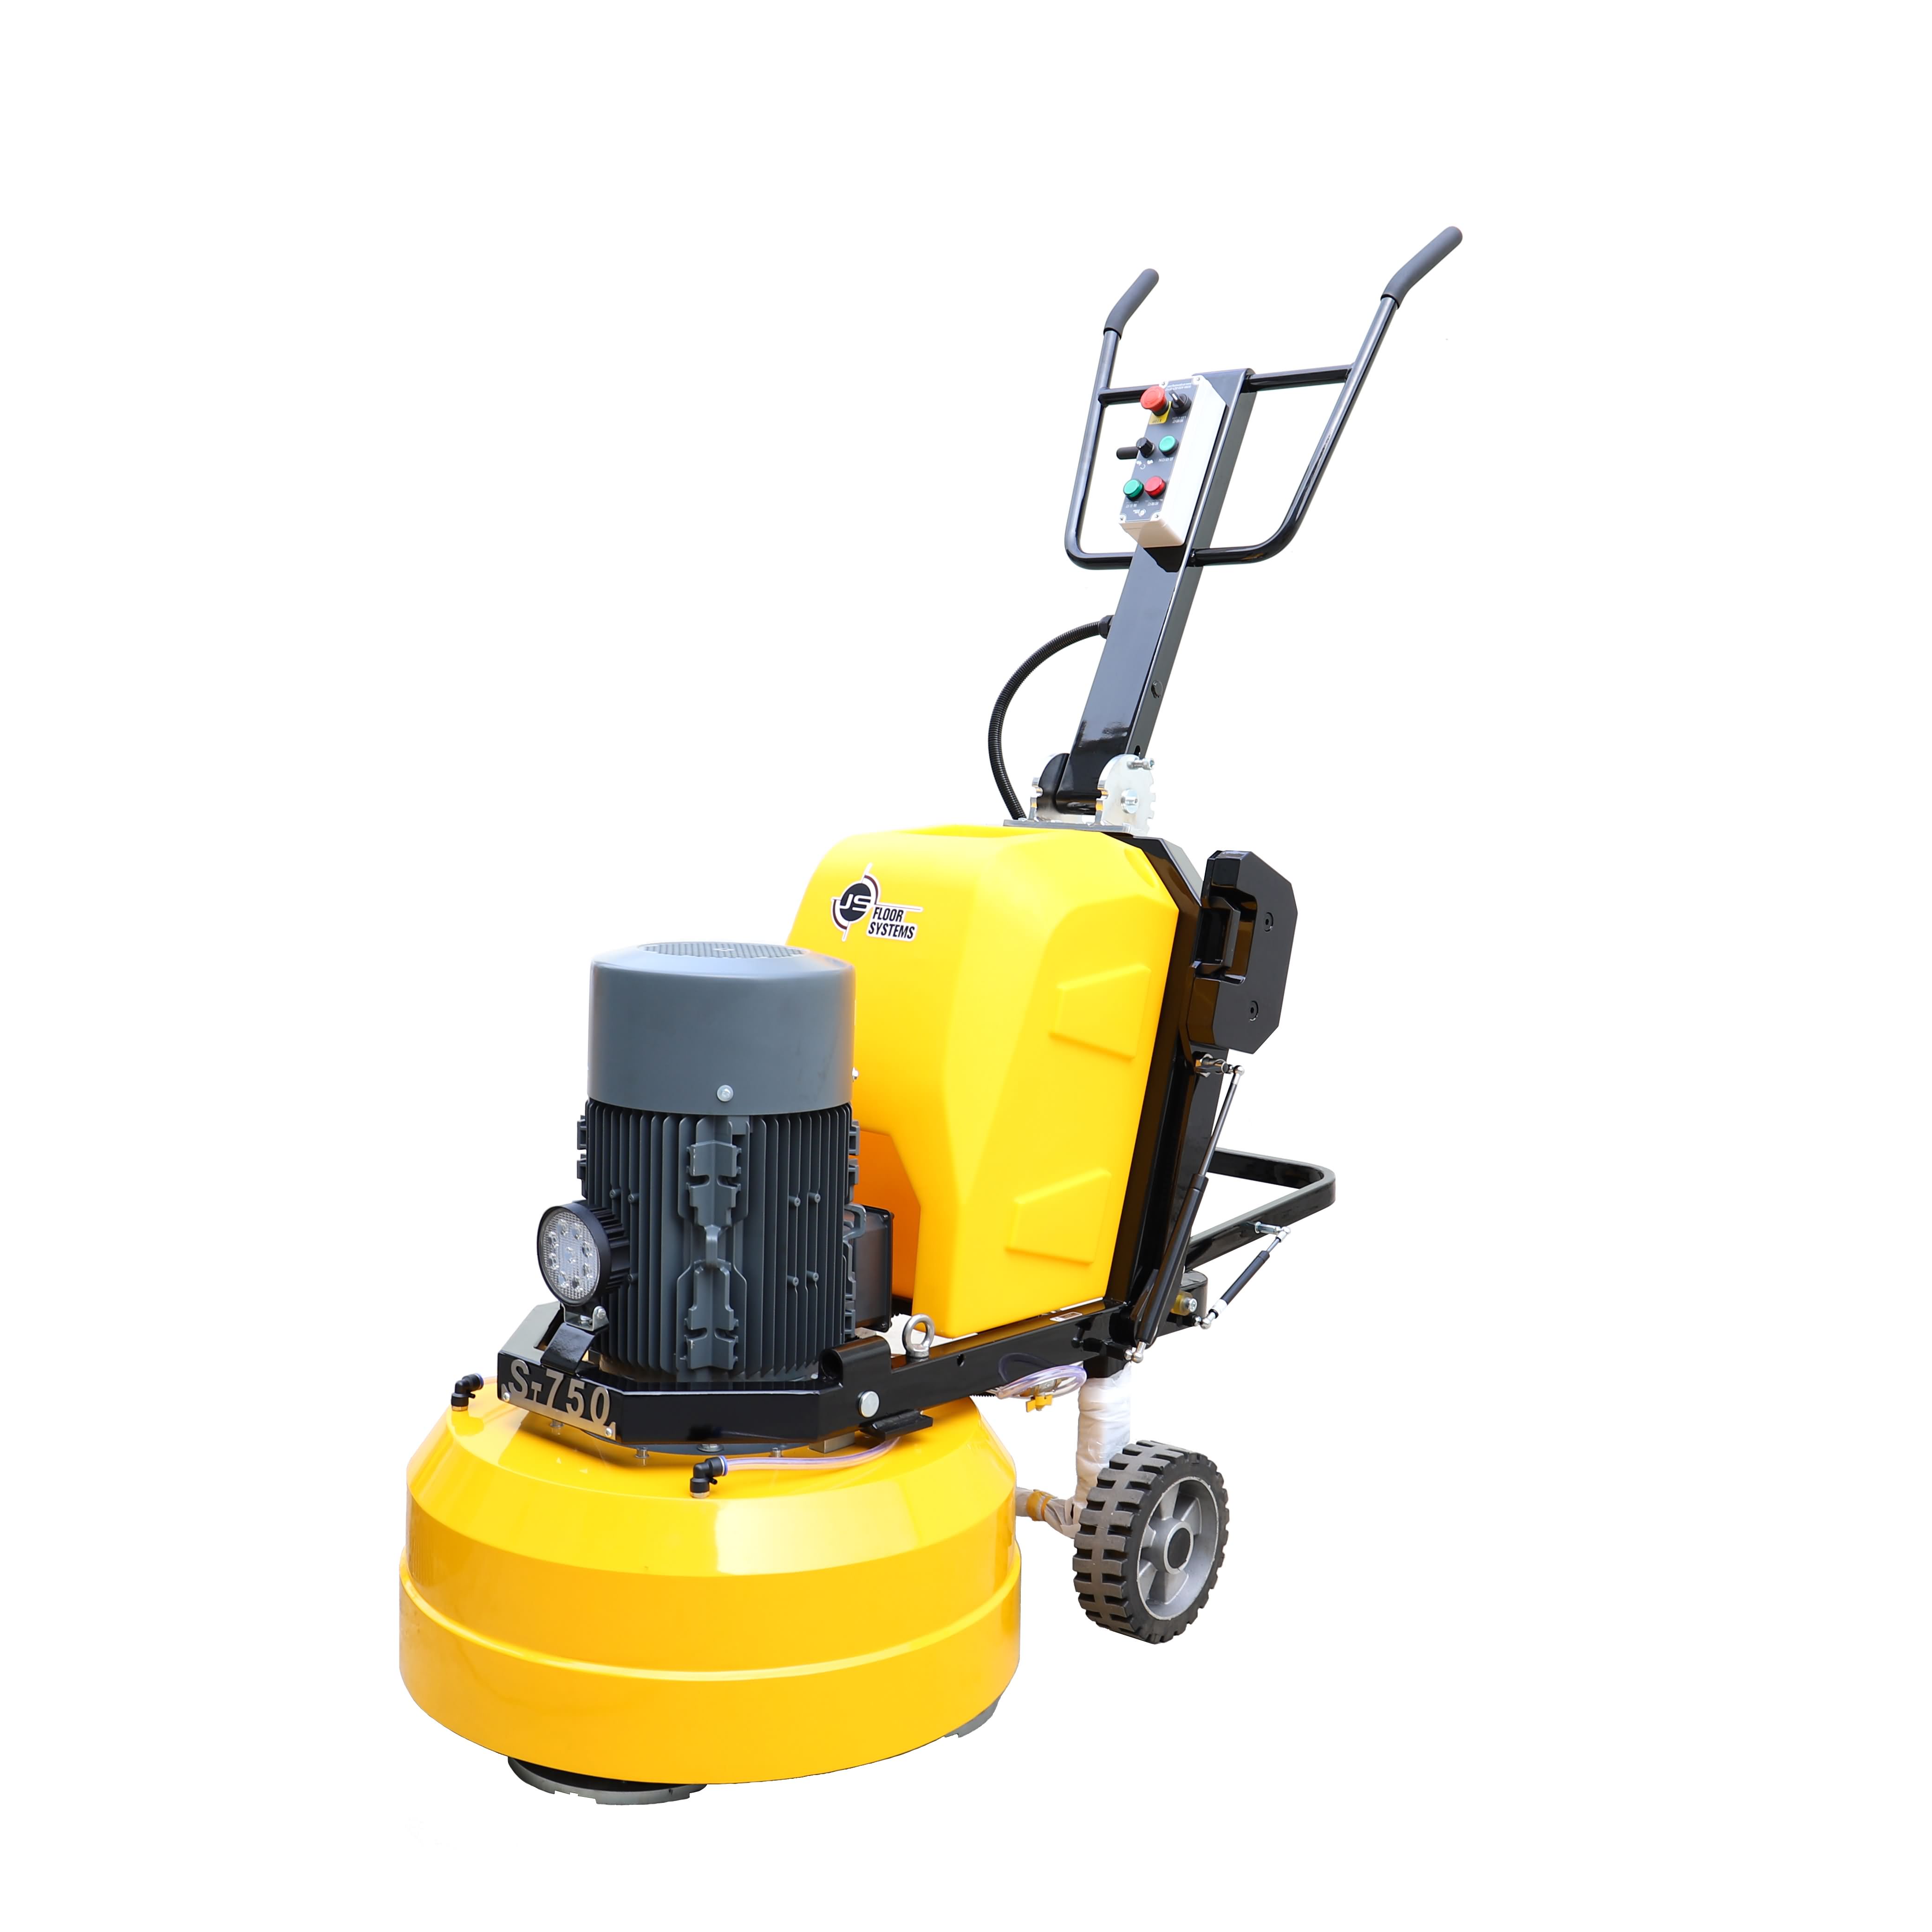 China Floor Buffer Machine Manufacturer And Factory Supplier